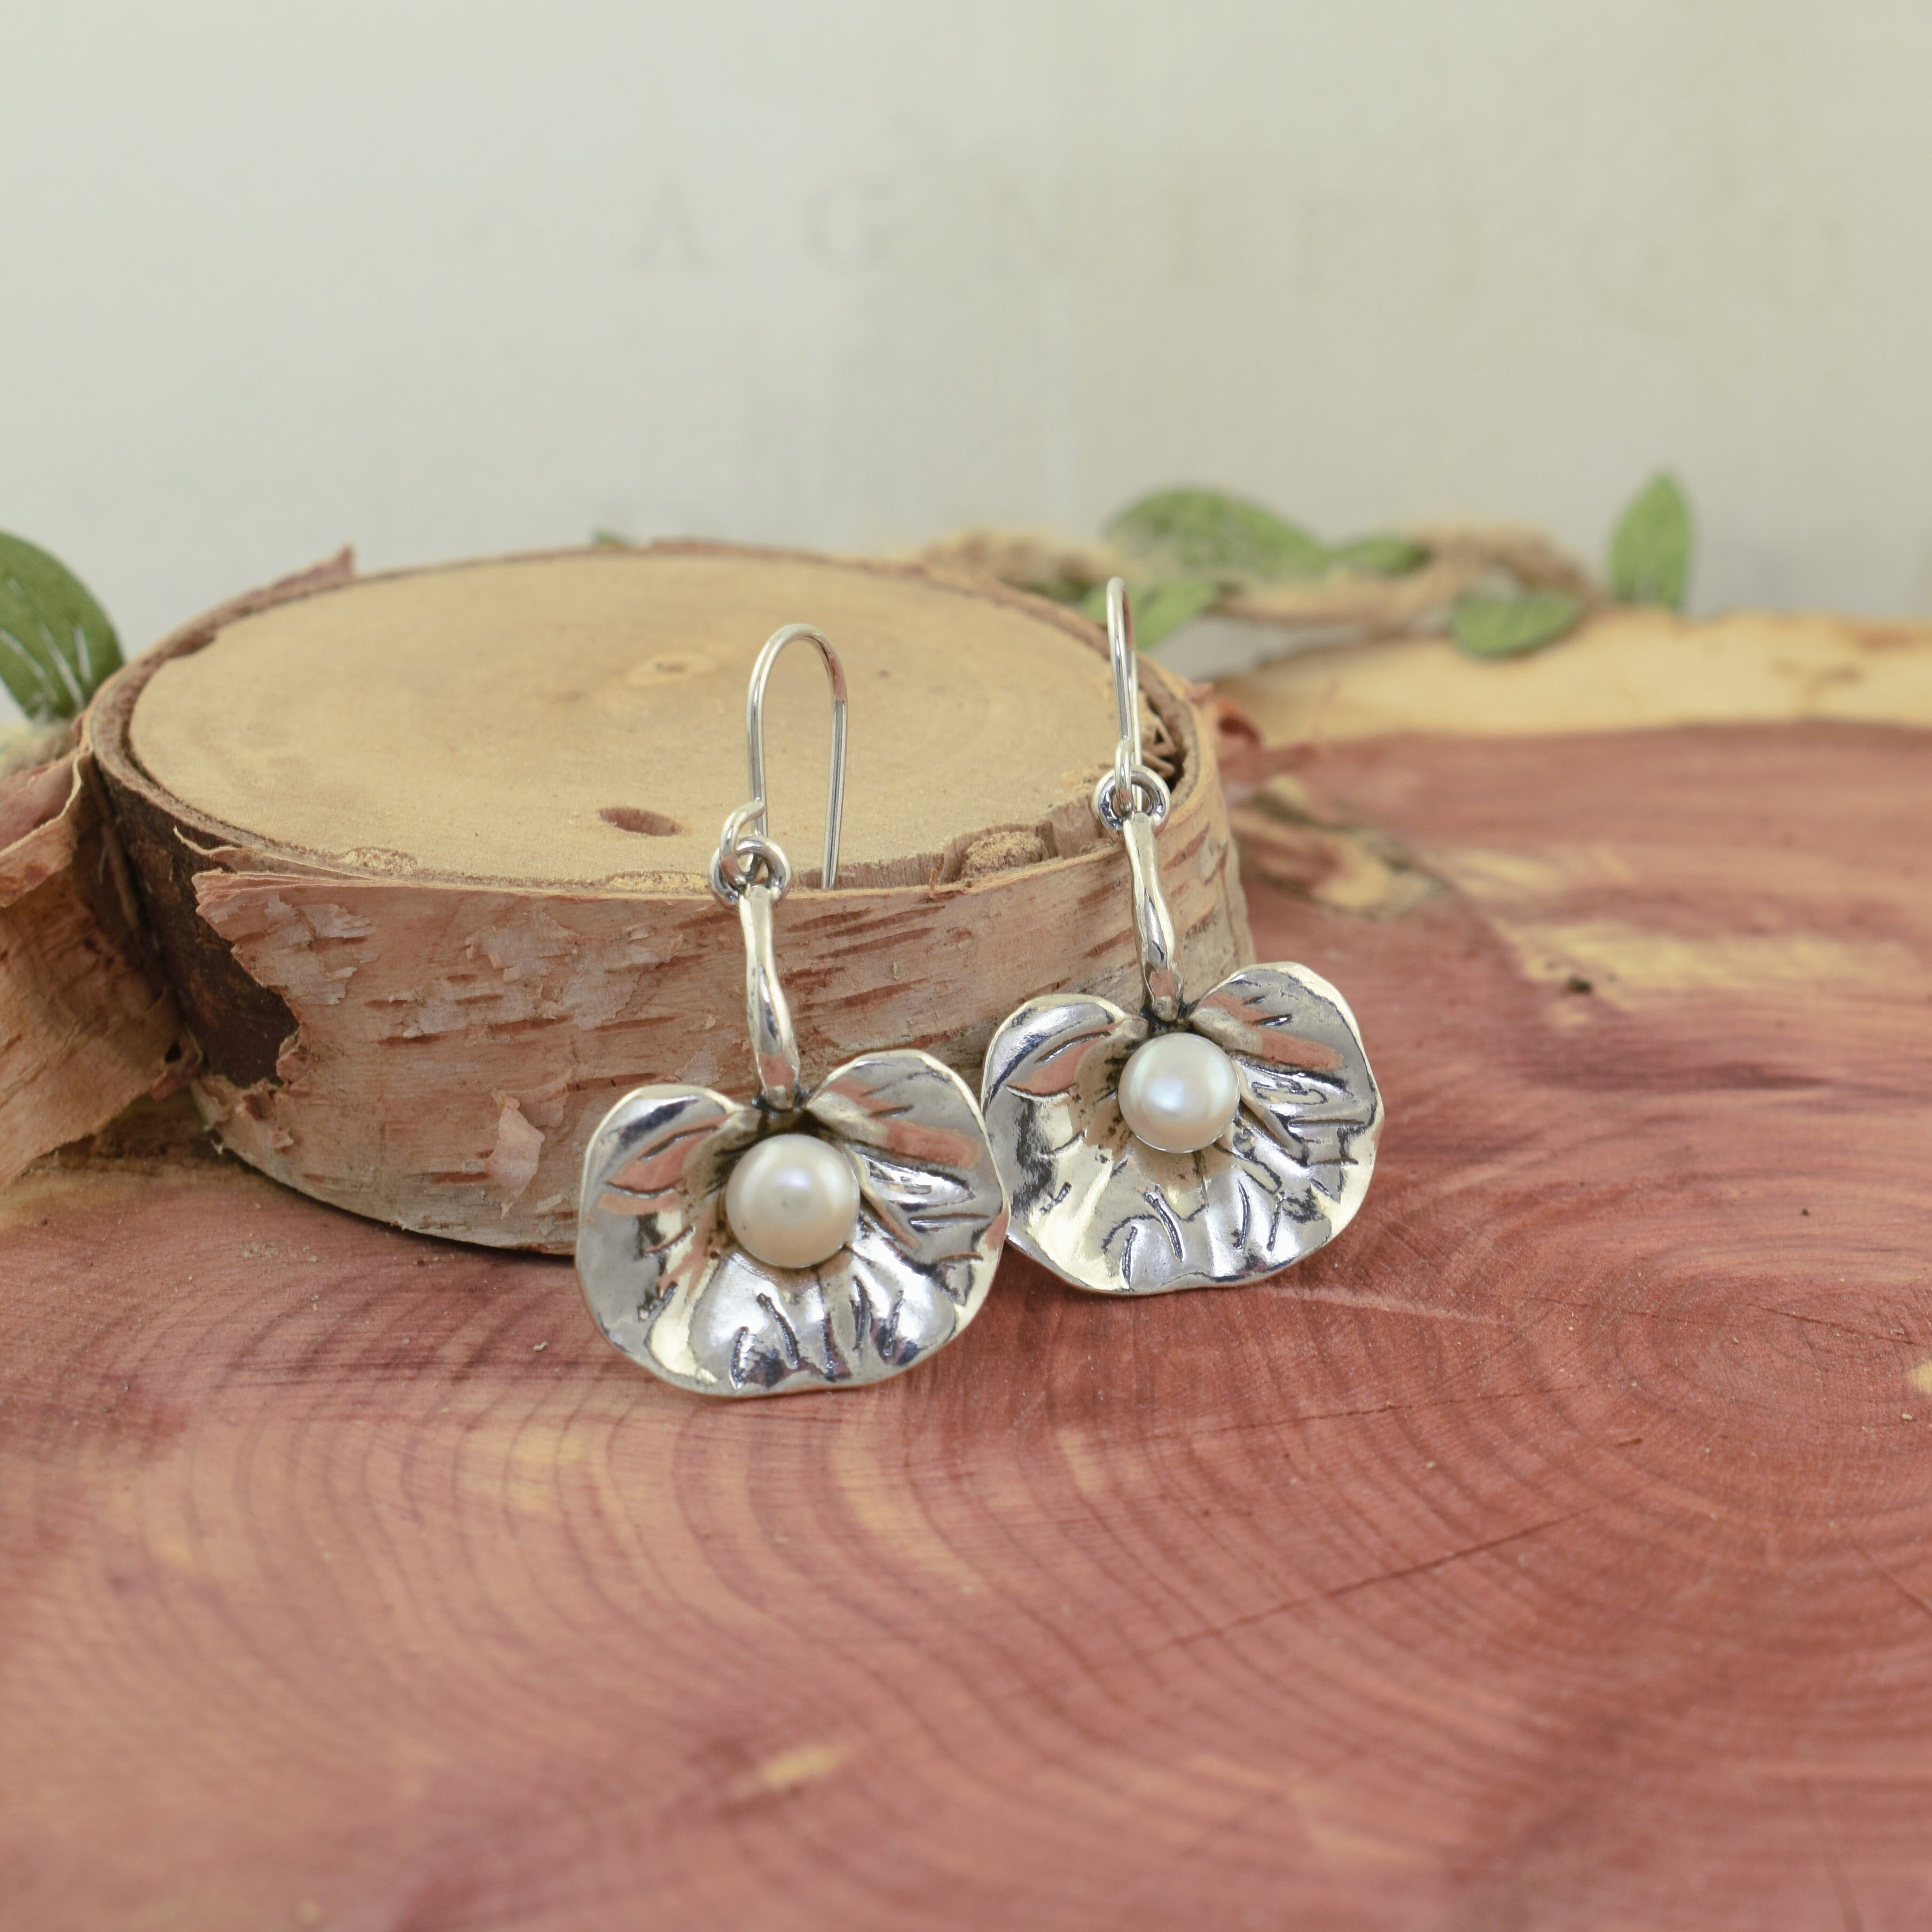 Freshwater pearl earrings set in sterling silver lily pad design